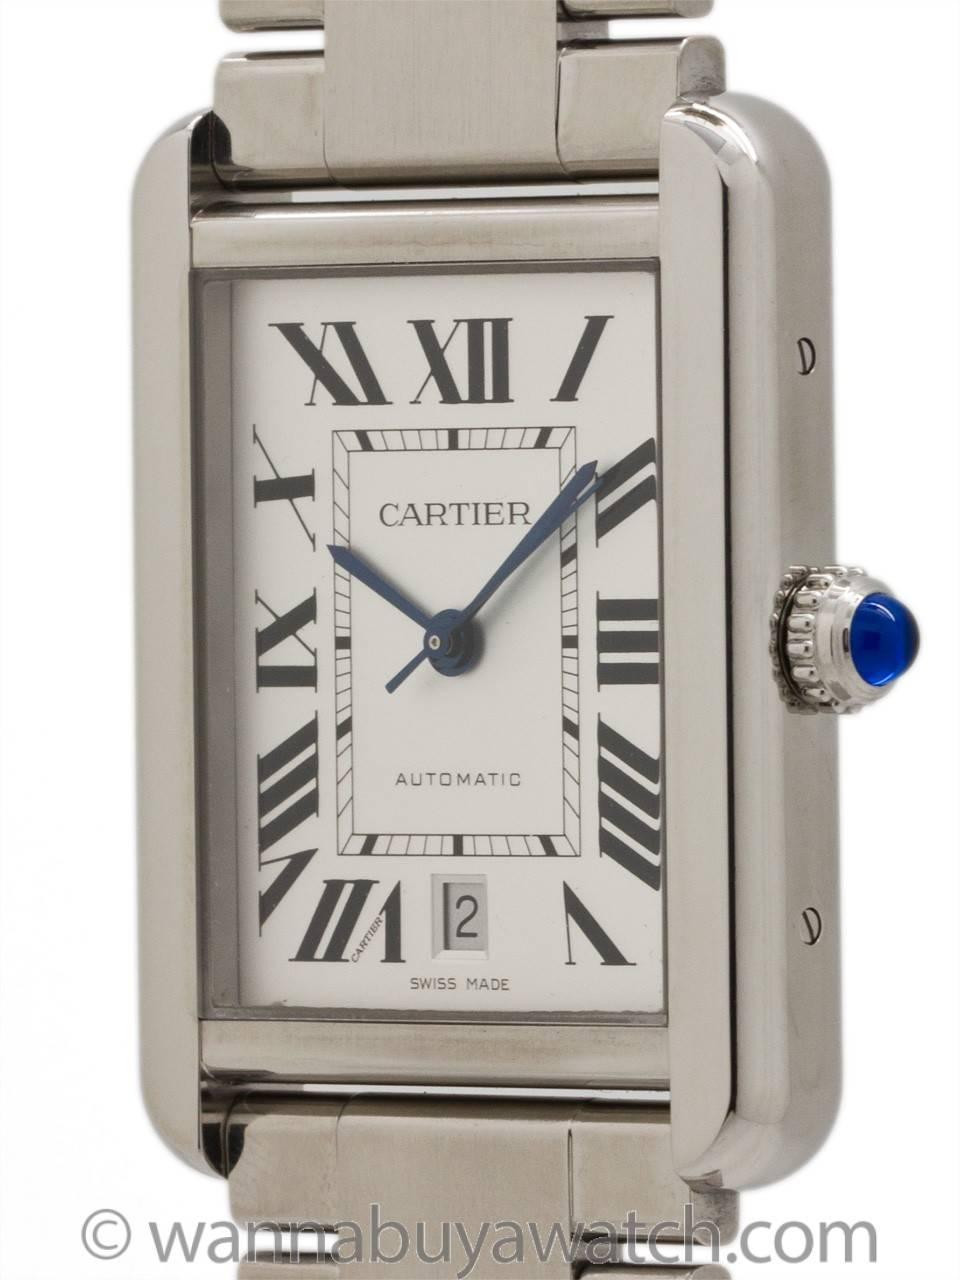 Cartier Tank Solo Stainless Steel large size 31 X 40mm model with Cartier bracelet and clasp. Featuring classic satin dial with oversize black Roman figures and blued steel hands. Powered by self winding movement with sweep seconds and date.